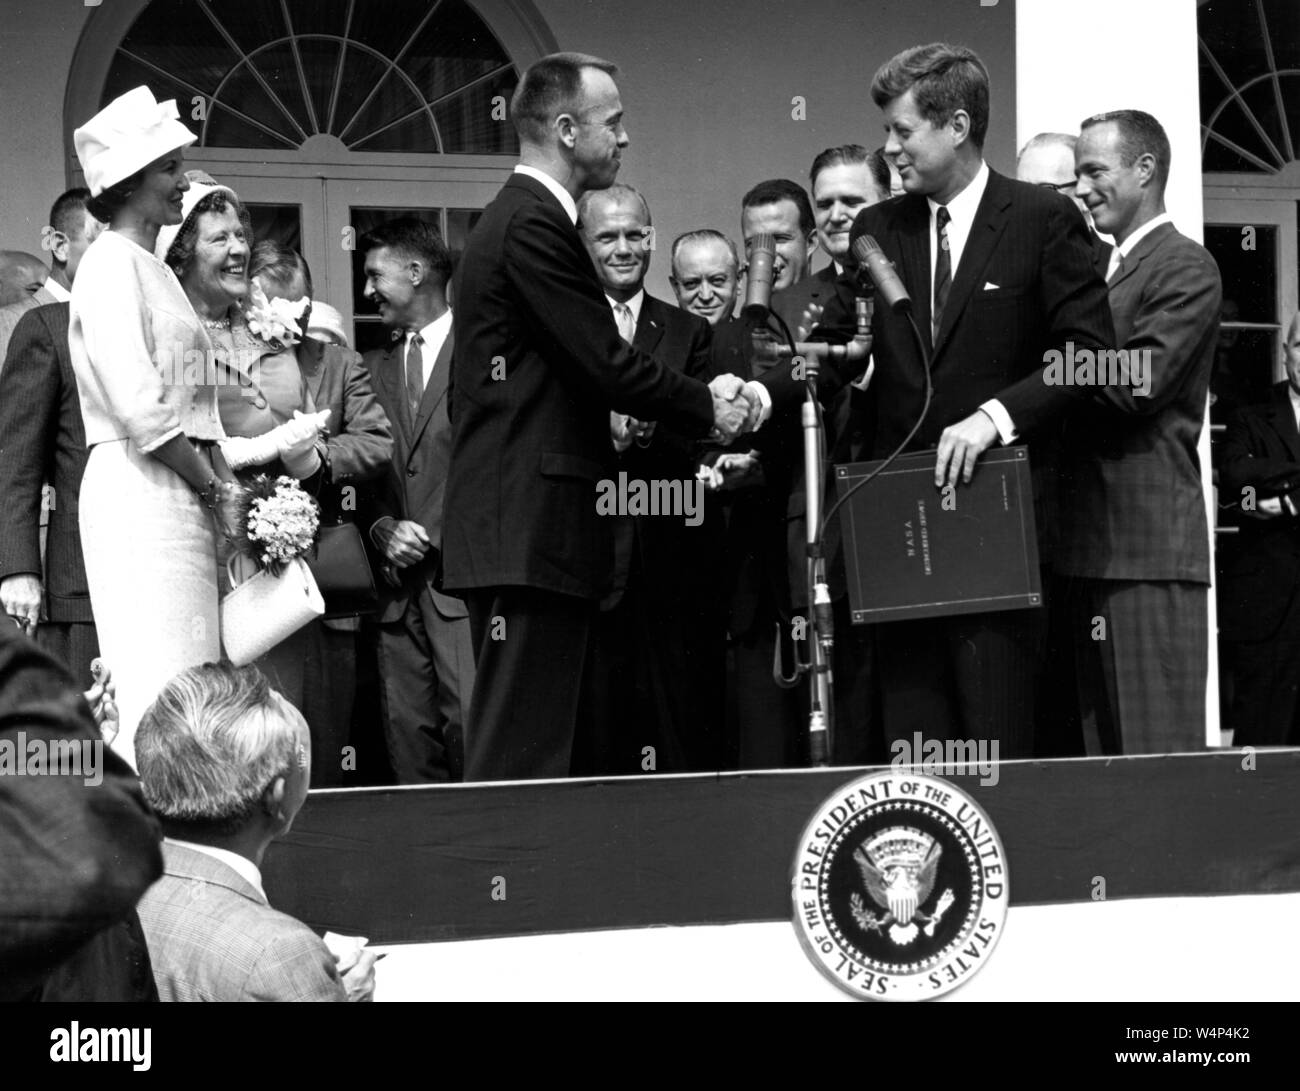 President John F Kennedy congratulates astronaut Alan B Shepard Jr, the first American in space, on his historic ride in the Freedom 7 spacecraft, White House, Washington, District of Columbia, May 8, 1961. Image courtesy National Aeronautics and Space Administration (NASA). () Stock Photo